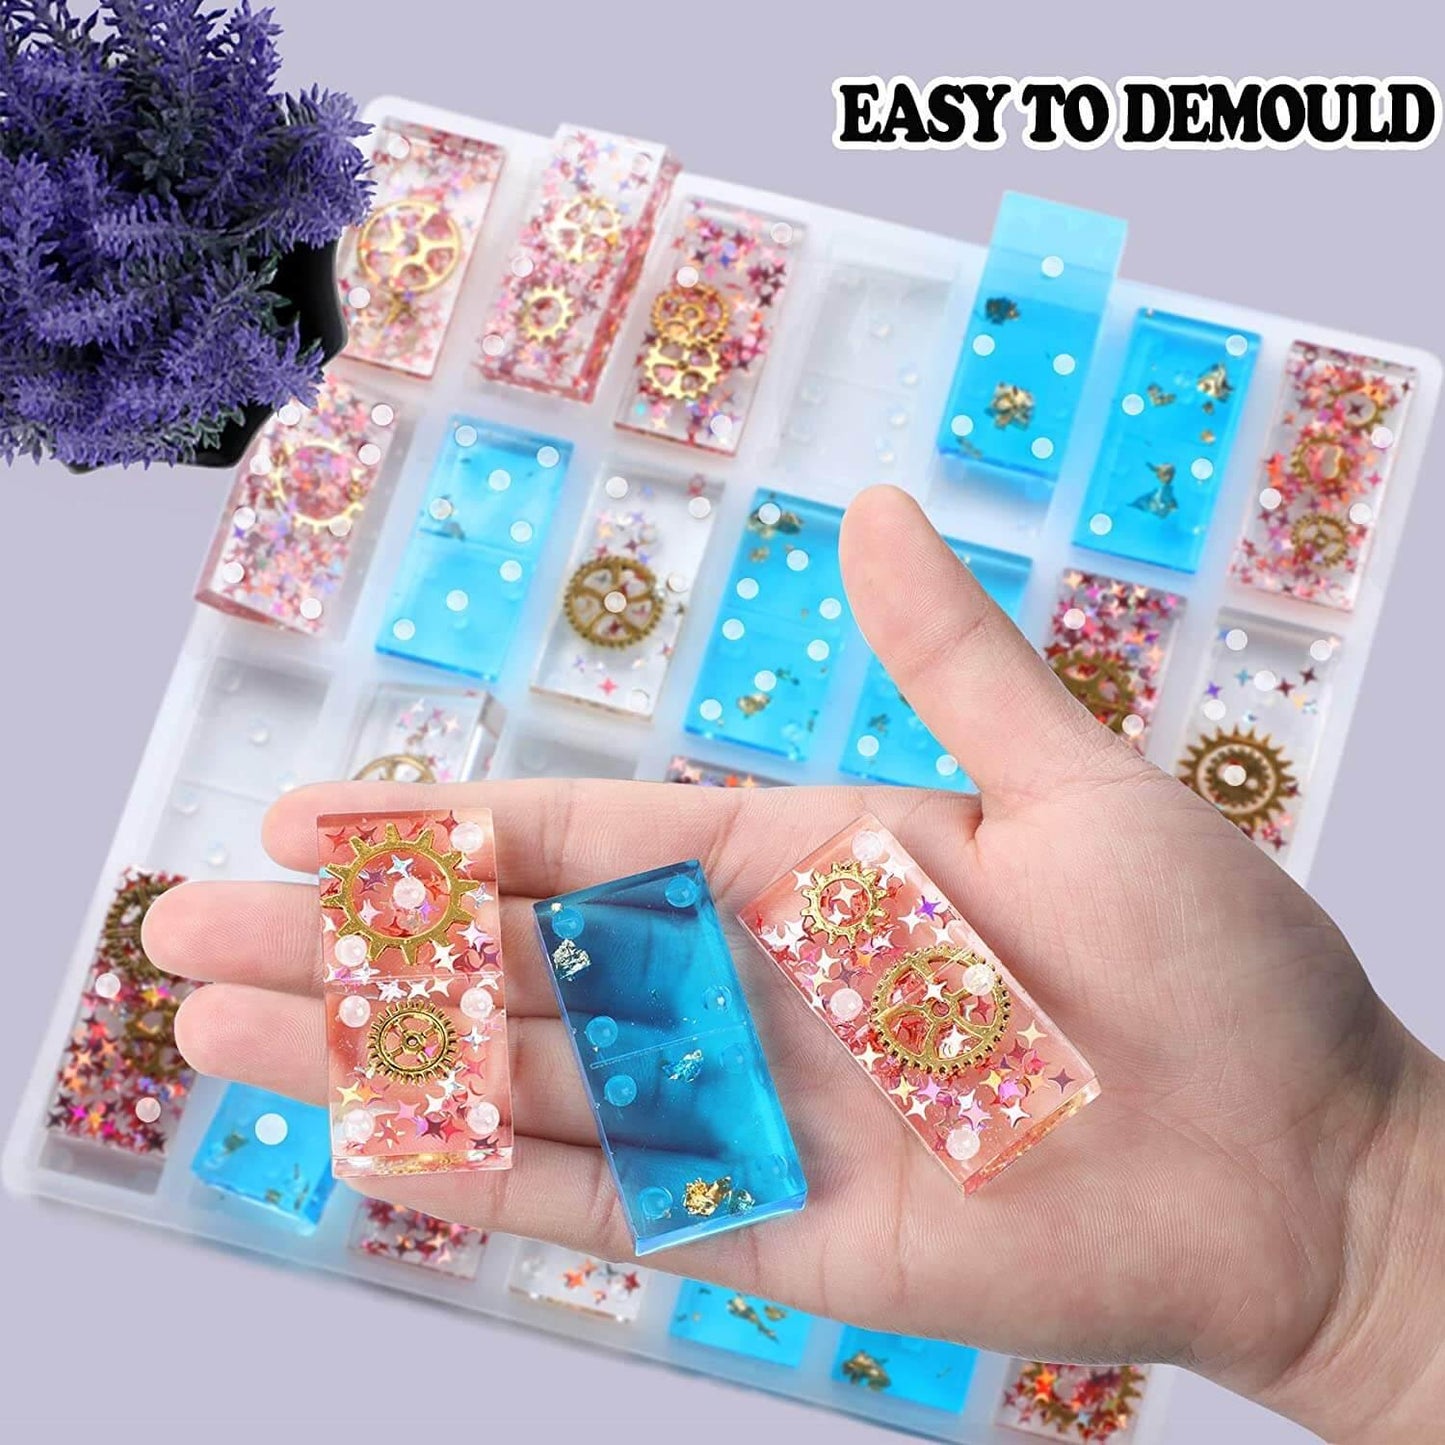 IntoResin Resin Domino Molds, Domino Molds for Resin Casting - IntoResin